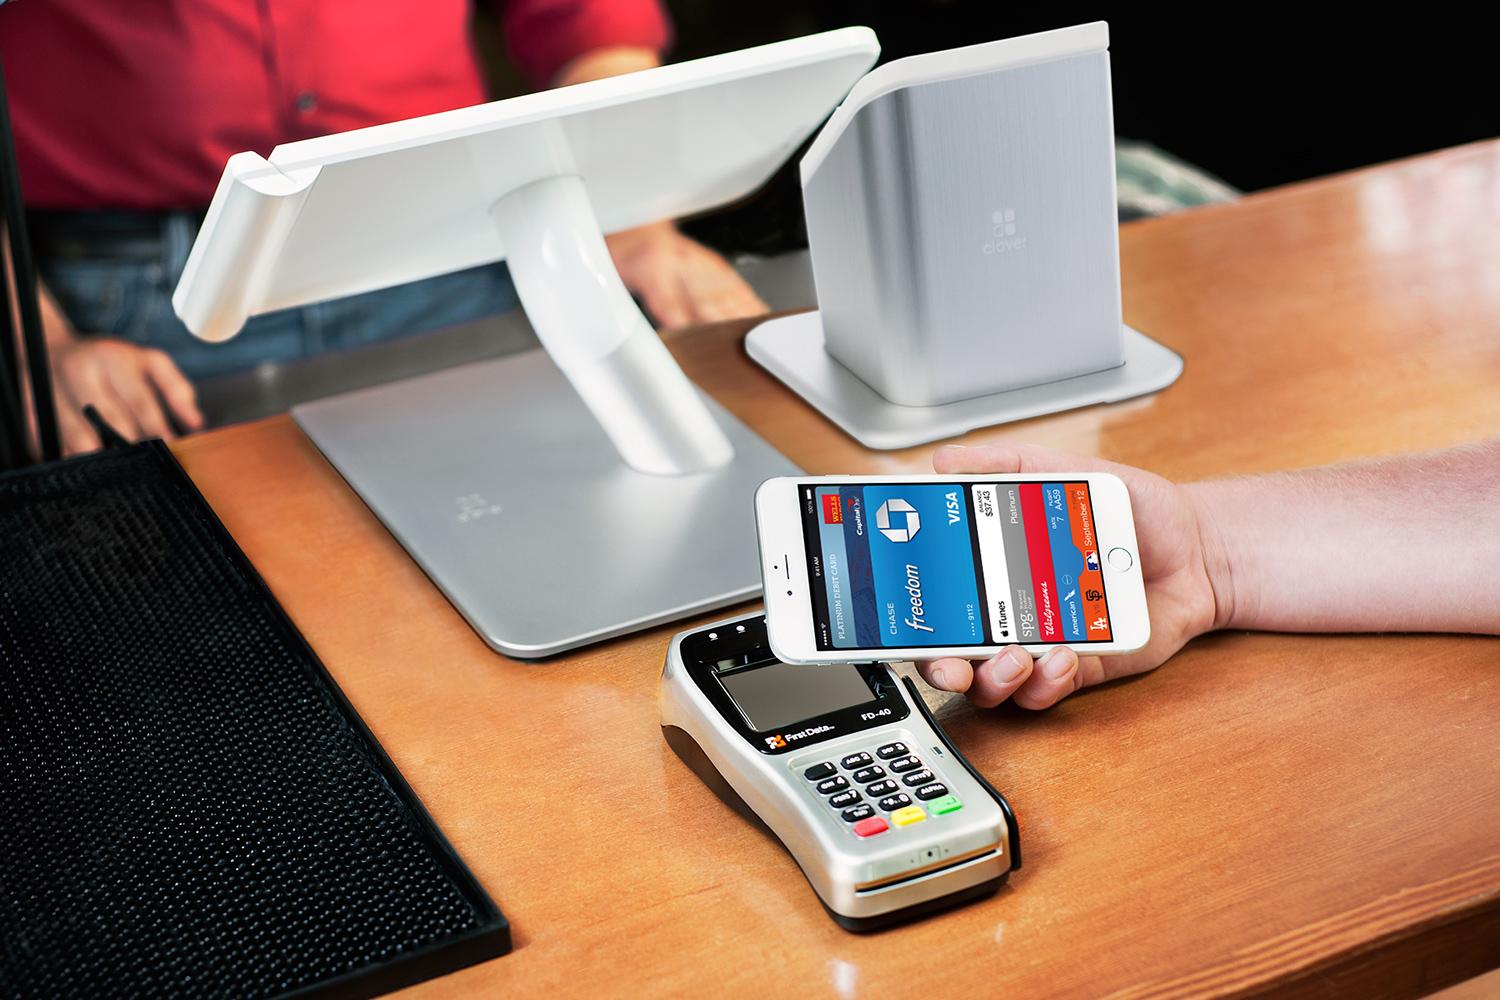 Will Apple Pay be a Game Changer for Payments in the Field?